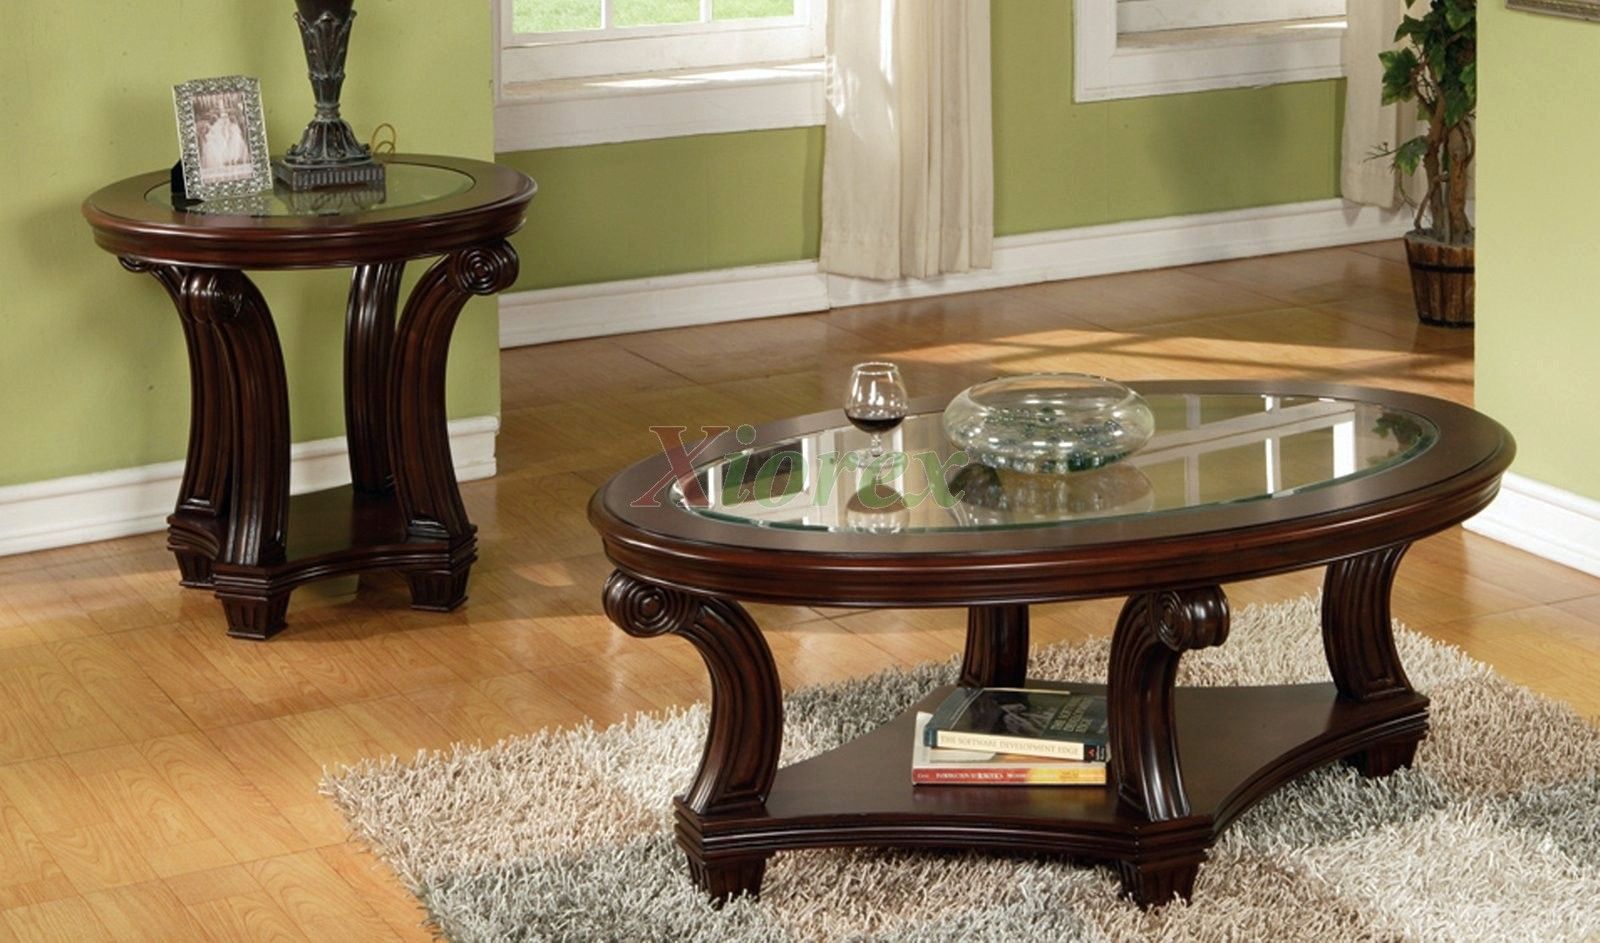 Oval Coffee Table Sets Decorating Ideas (View 15 of 20)